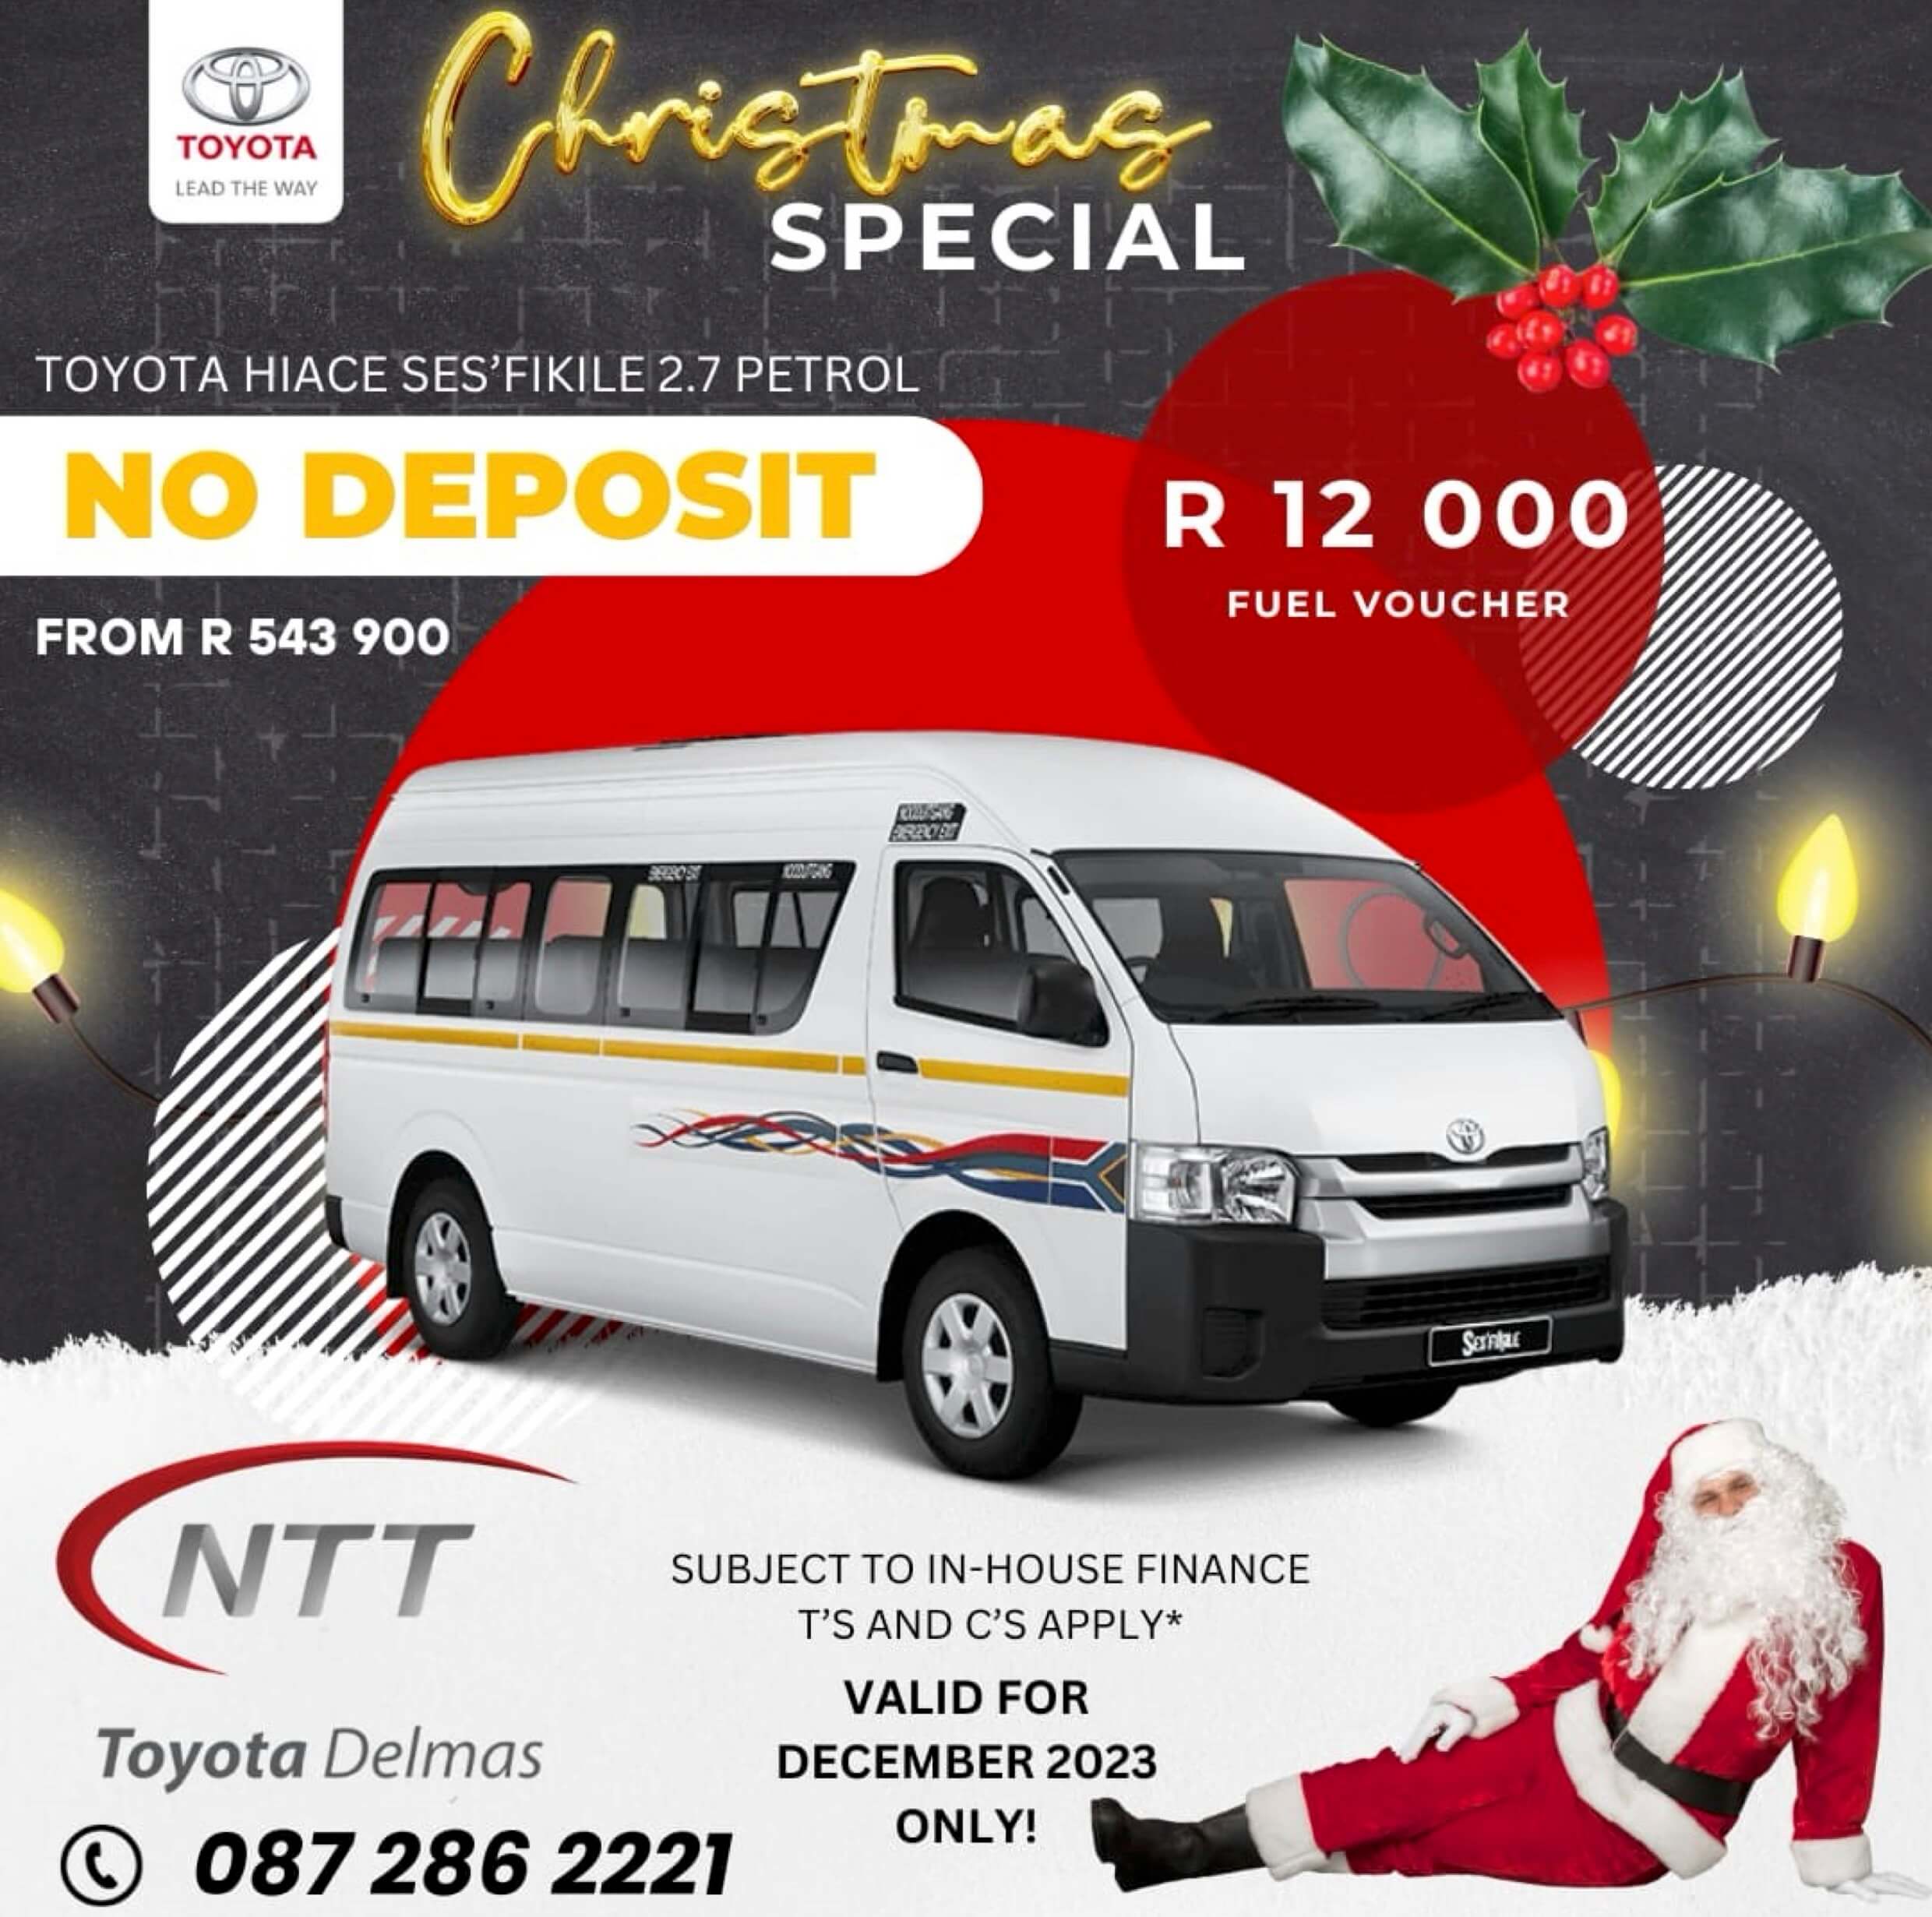 Toyota Hiace Ses’Fikile 2.7 Petrol - NTT Motor Group - New, Used & Demo Cars for Sale in South Africa